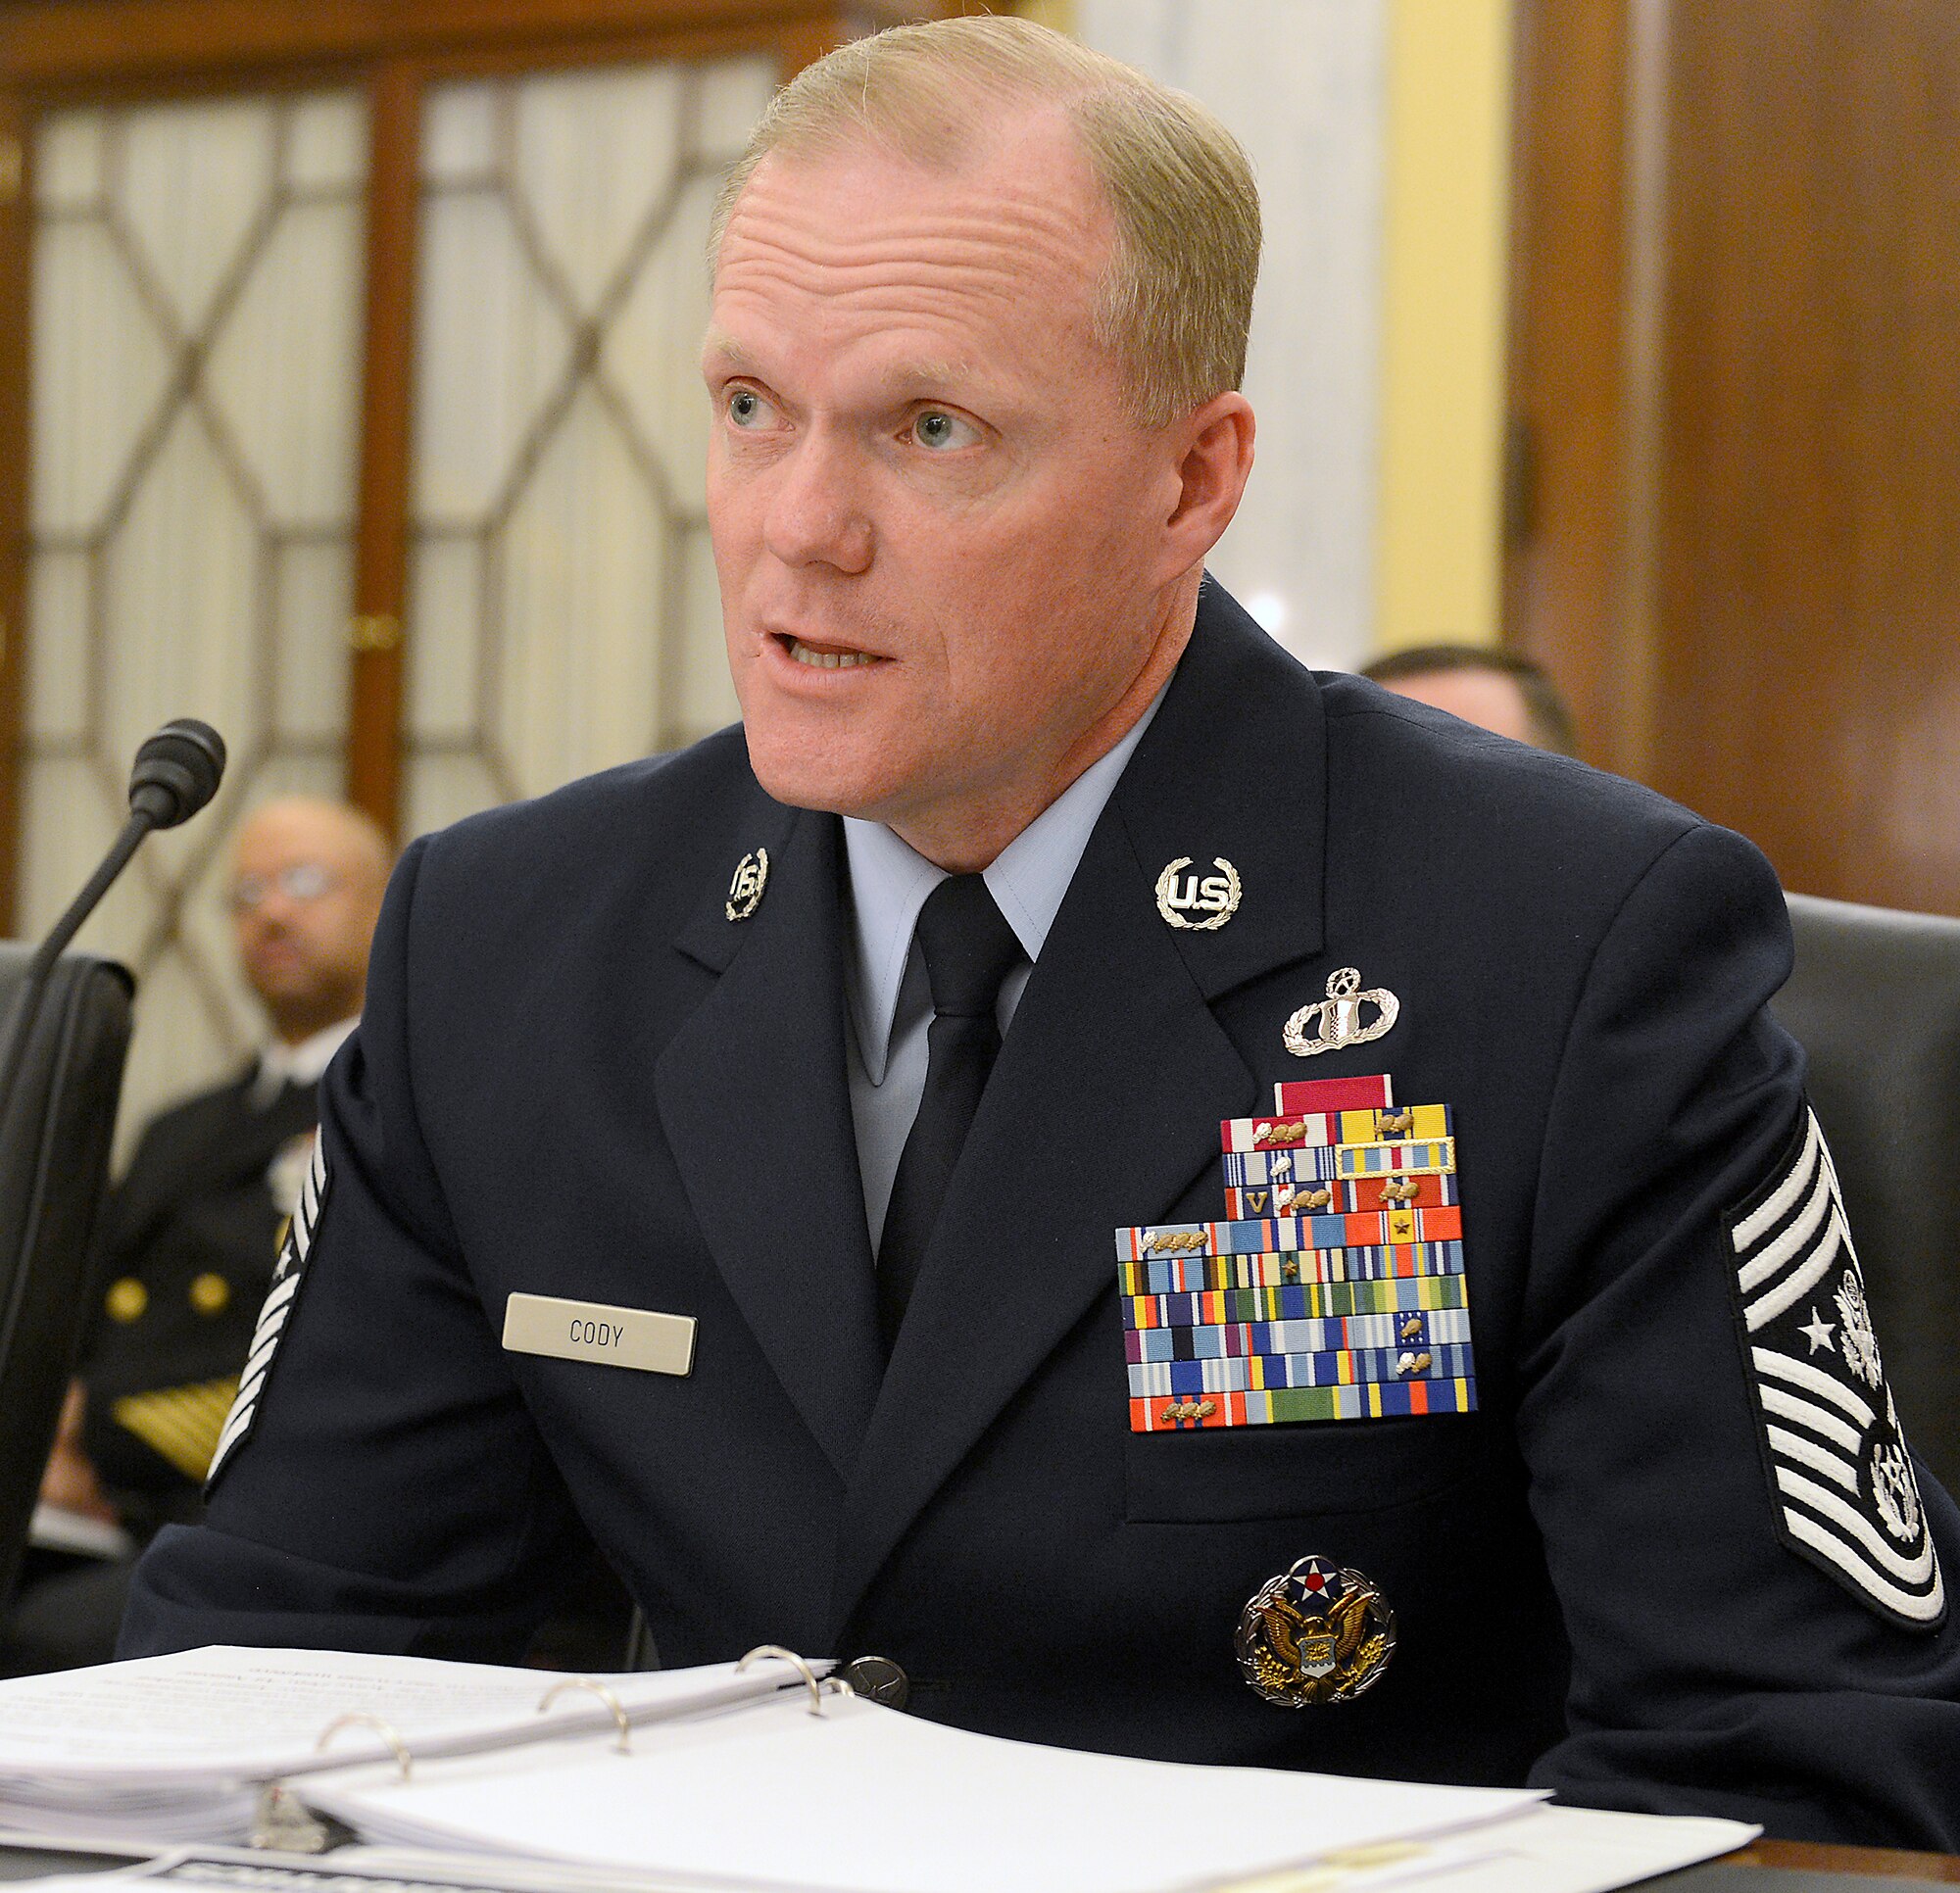 Chief Master Sgt. of the Air Force James A. Cody testifies on the active, Guard, Reserve and civilian programs in review of the Defense Authorization Request for Fiscal Year 2015, and the Future Years Defense Program before the Senate Appropriations Subcommittee on Personnel, April 9, 2014, in Washington, D.C.  Cody was joined by Sgt. Major of the Army Raymond D. Chandler III, Master Chief Petty Officer of the Navy Michael D. Stevens and Sgt. Major of the Marine Corps Michael P. Barrett.  (U.S. Air Force photo/Scott M. Ash)             